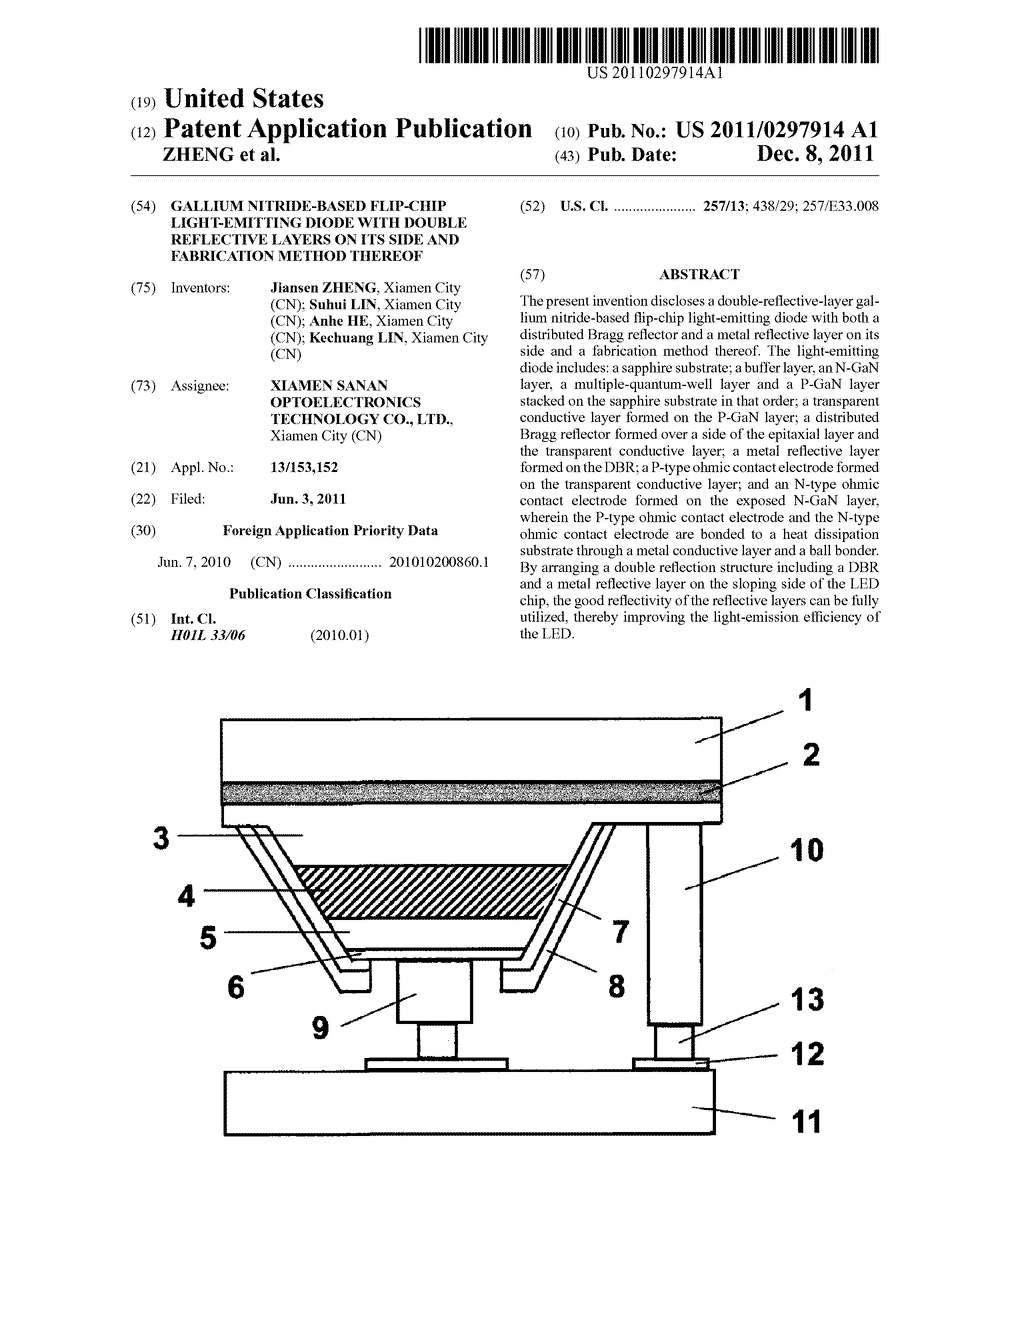 GALLIUM NITRIDE-BASED FLIP-CHIP LIGHT-EMITTING DIODE WITH DOUBLE     REFLECTIVE LAYERS ON ITS SIDE AND FABRICATION METHOD THEREOF - diagram, schematic, and image 01